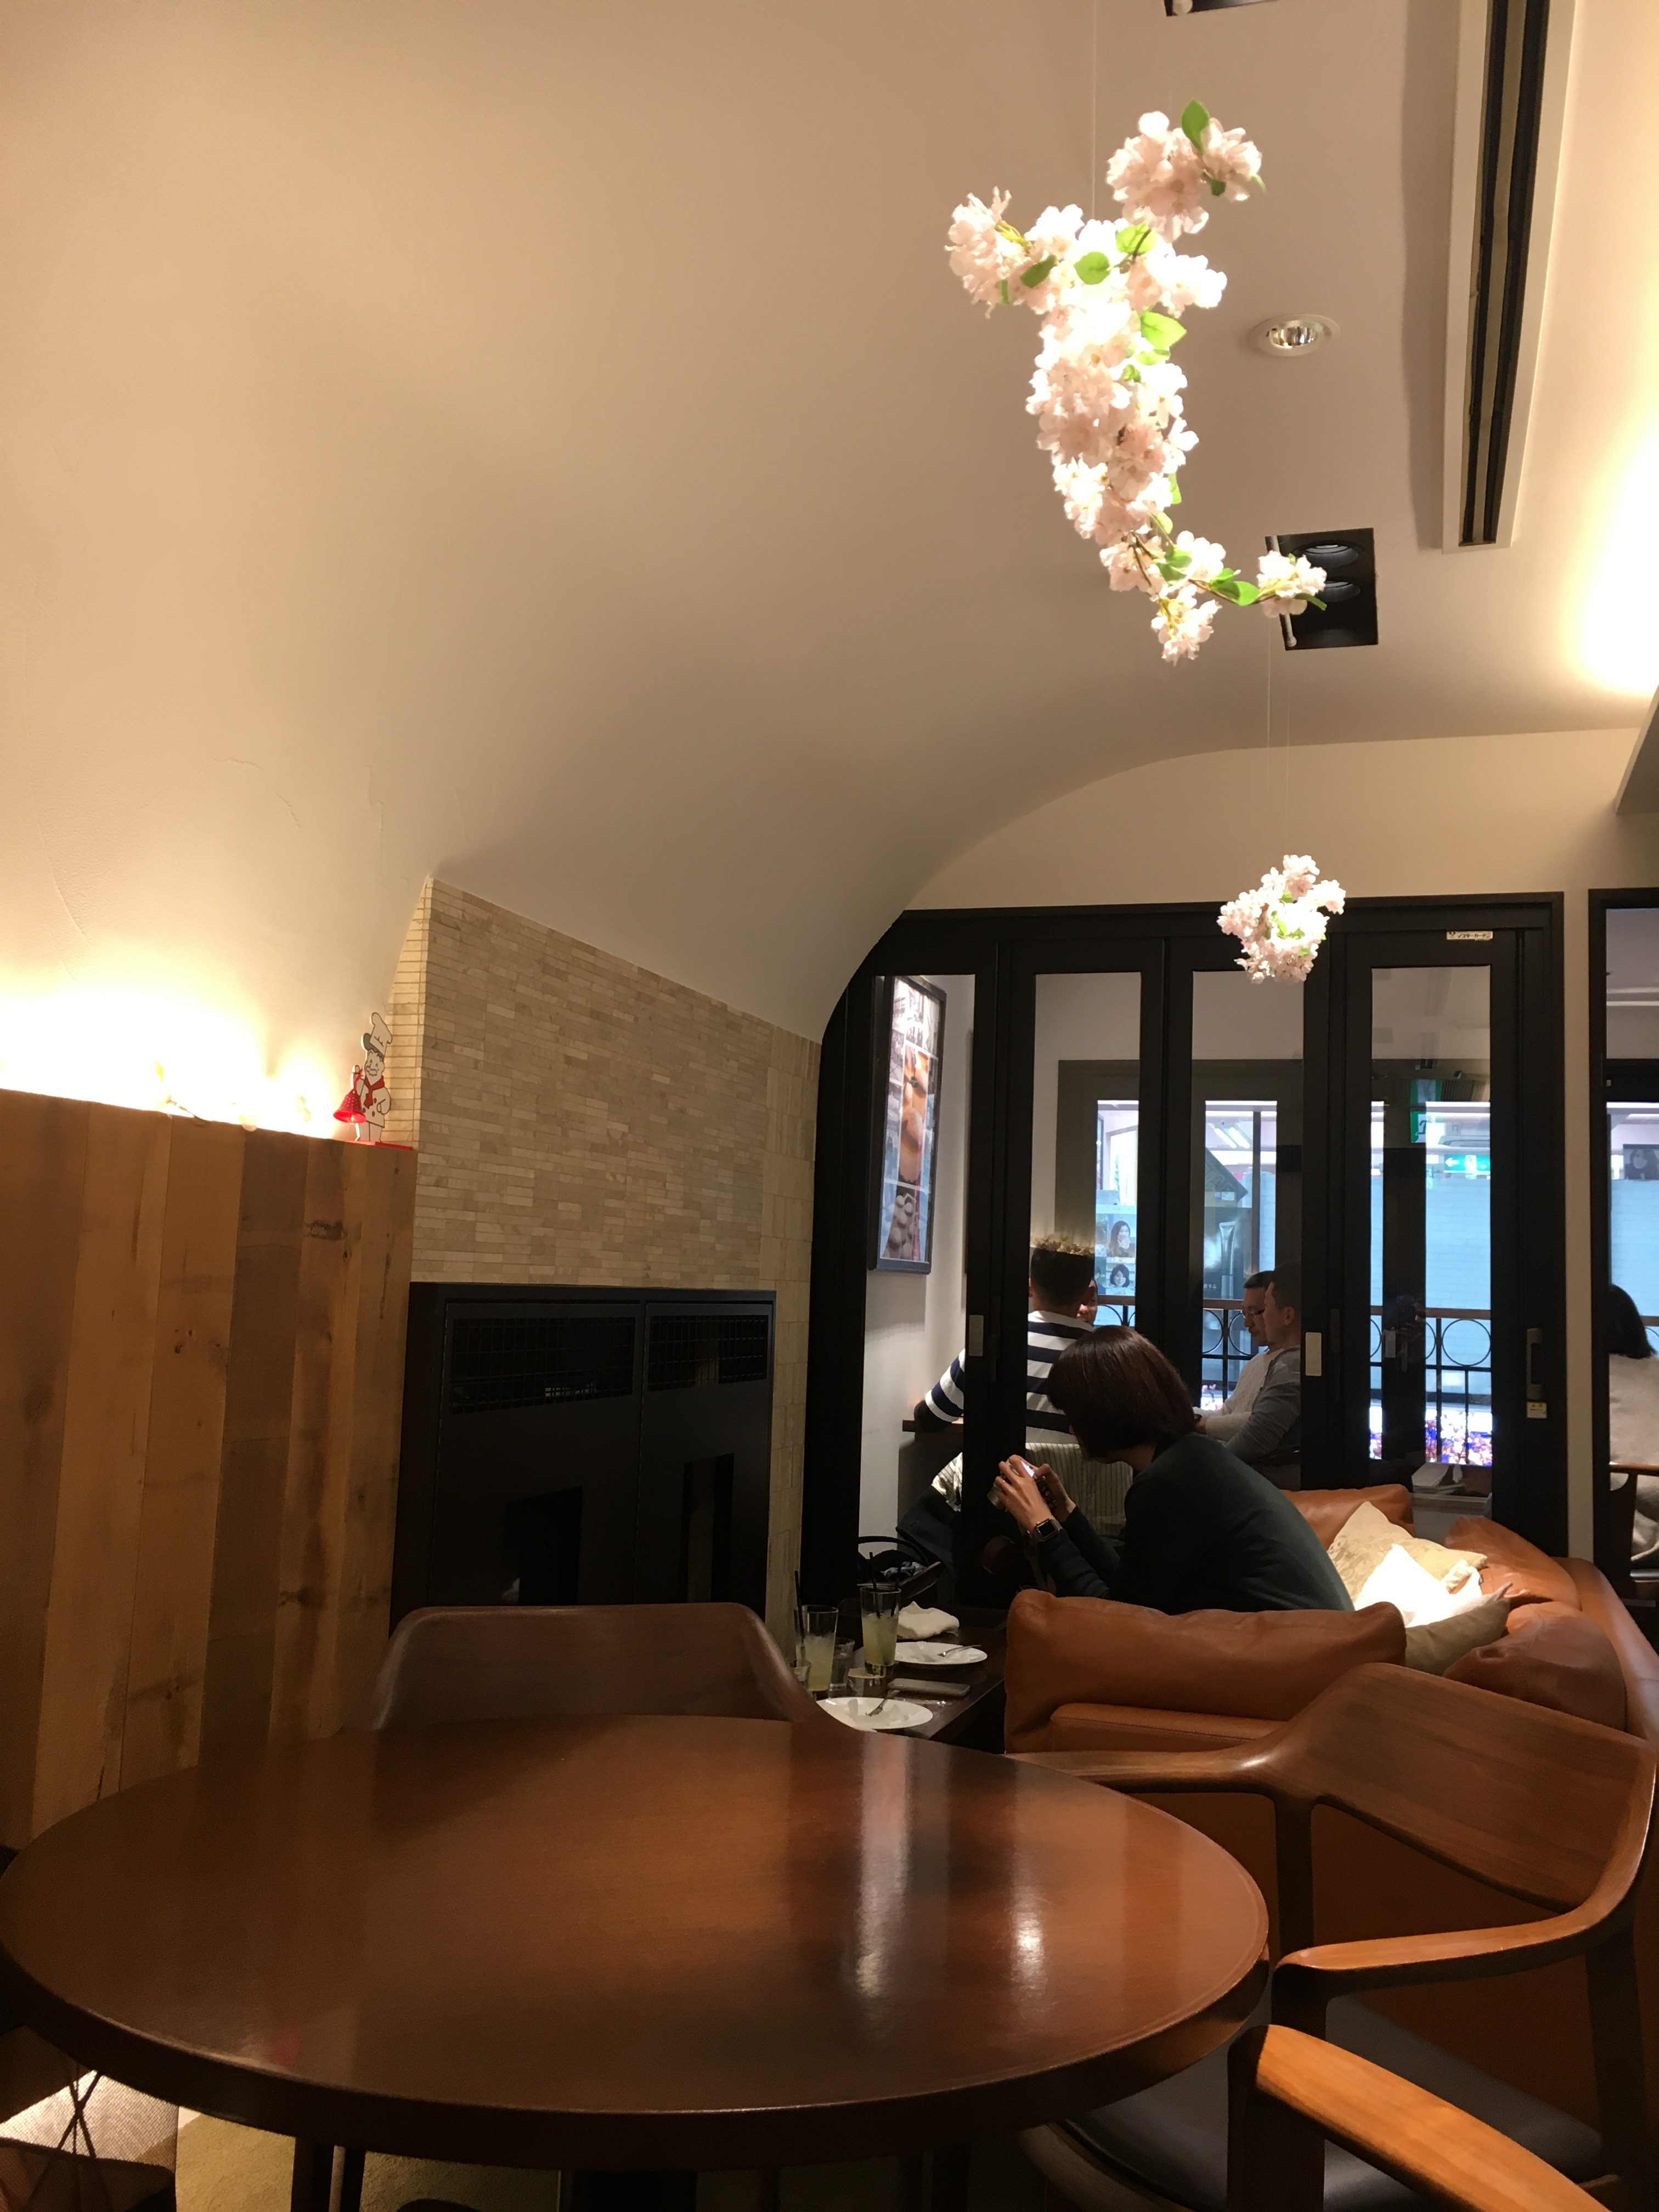 warmly lit cafe with wooden accents and fake flowers